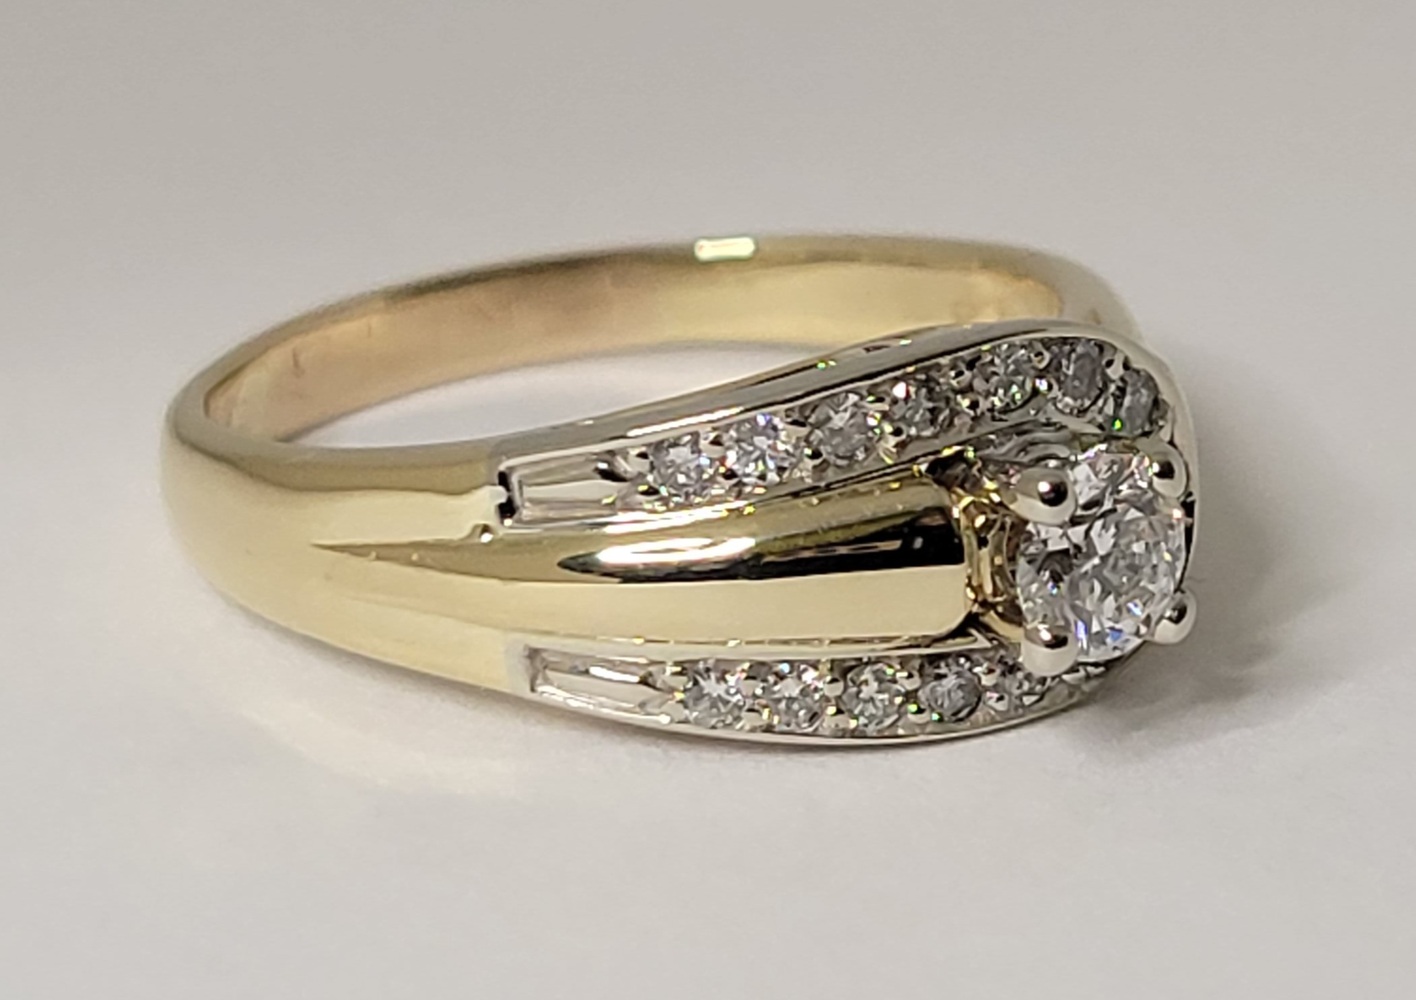 14K Yellow Gold  Belt Style Diamond Solitaire Ring Size 8.5 Approx. t.c.w. 0.33